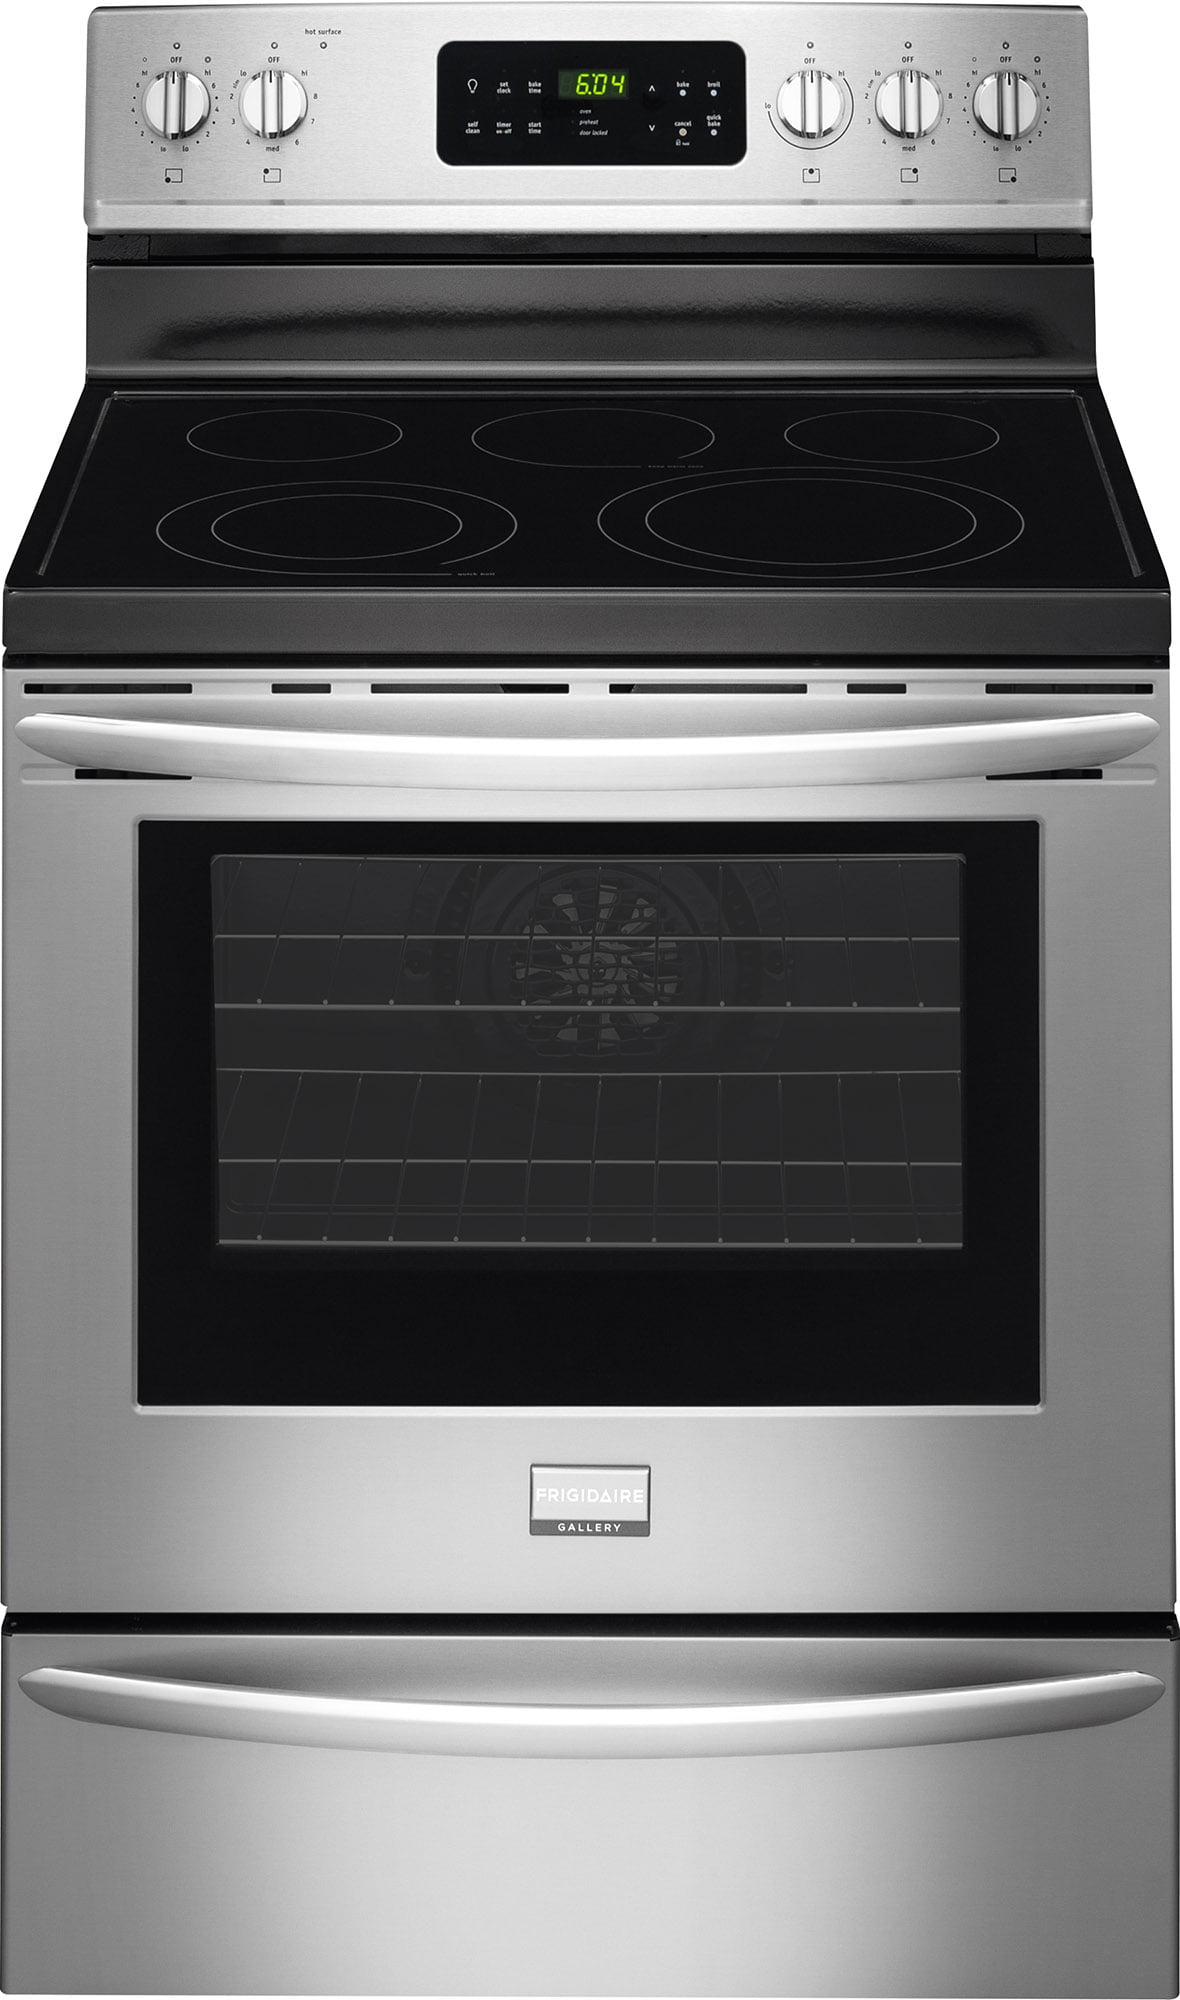 How do you determine the age of your general electric stove?